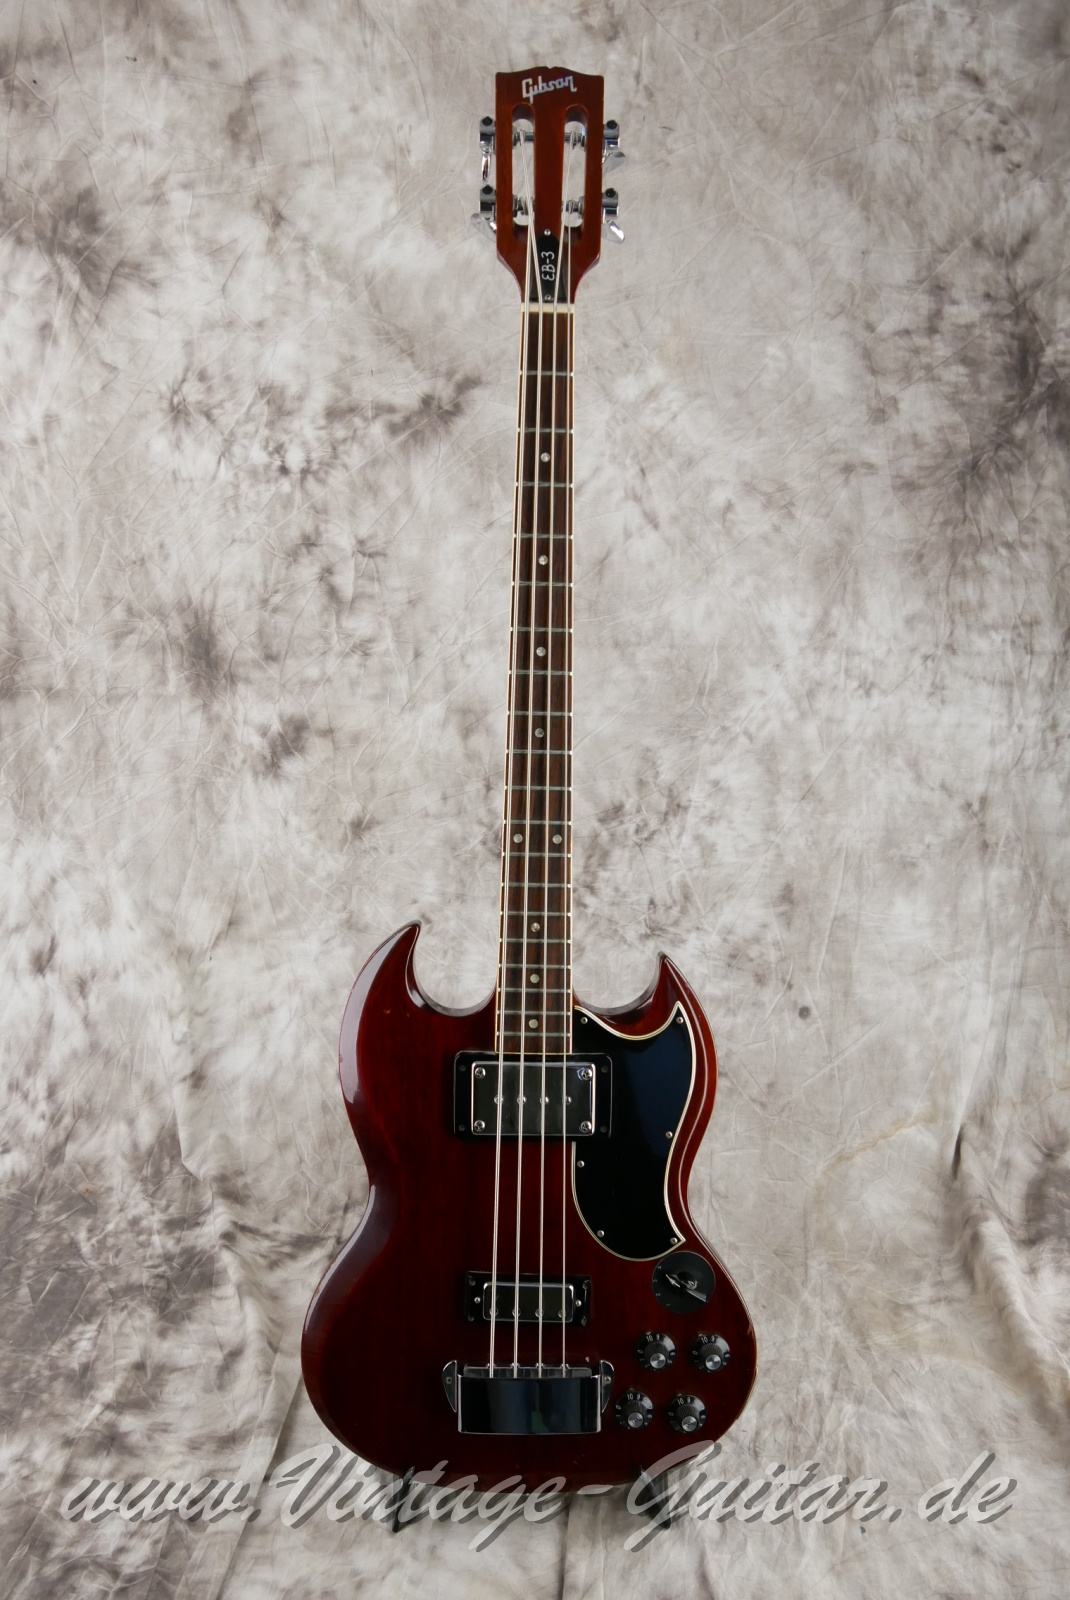 Gibson-EB3-slotted-headstock-1972-winered-001.jpg